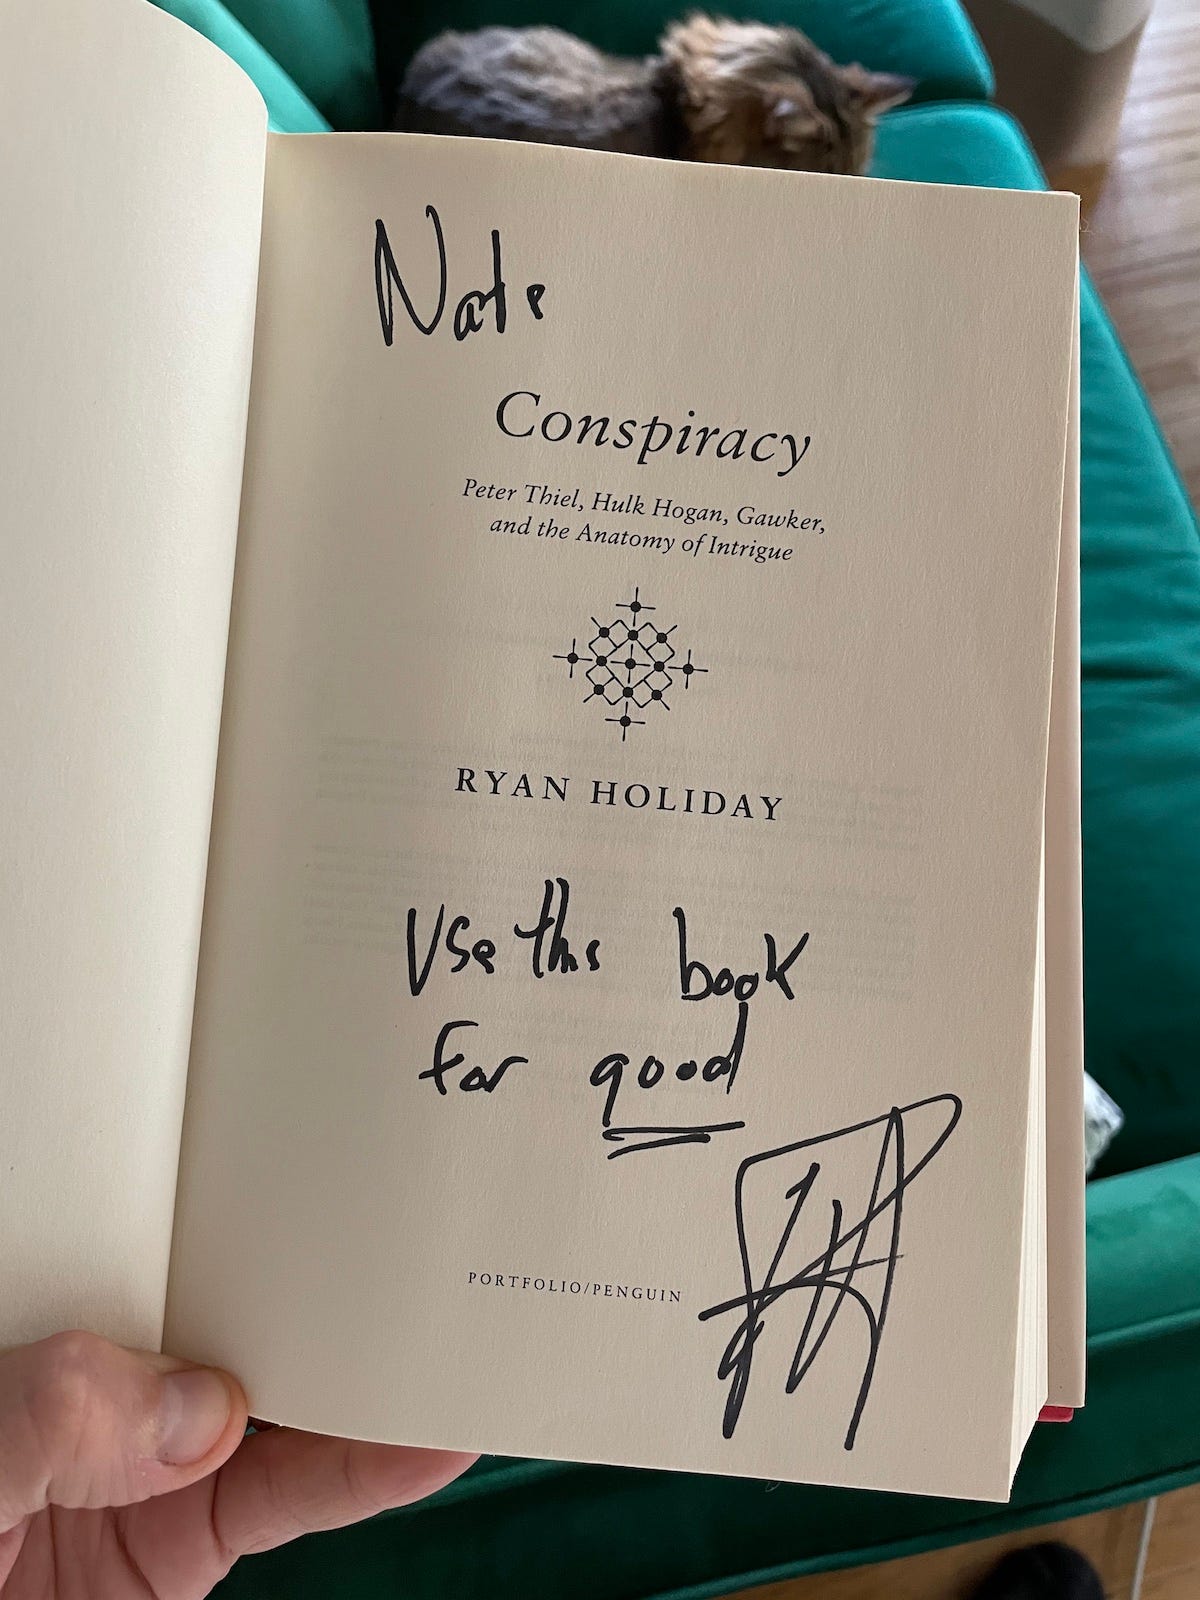 A signed copy of Conspiracy by Ryan Holiday